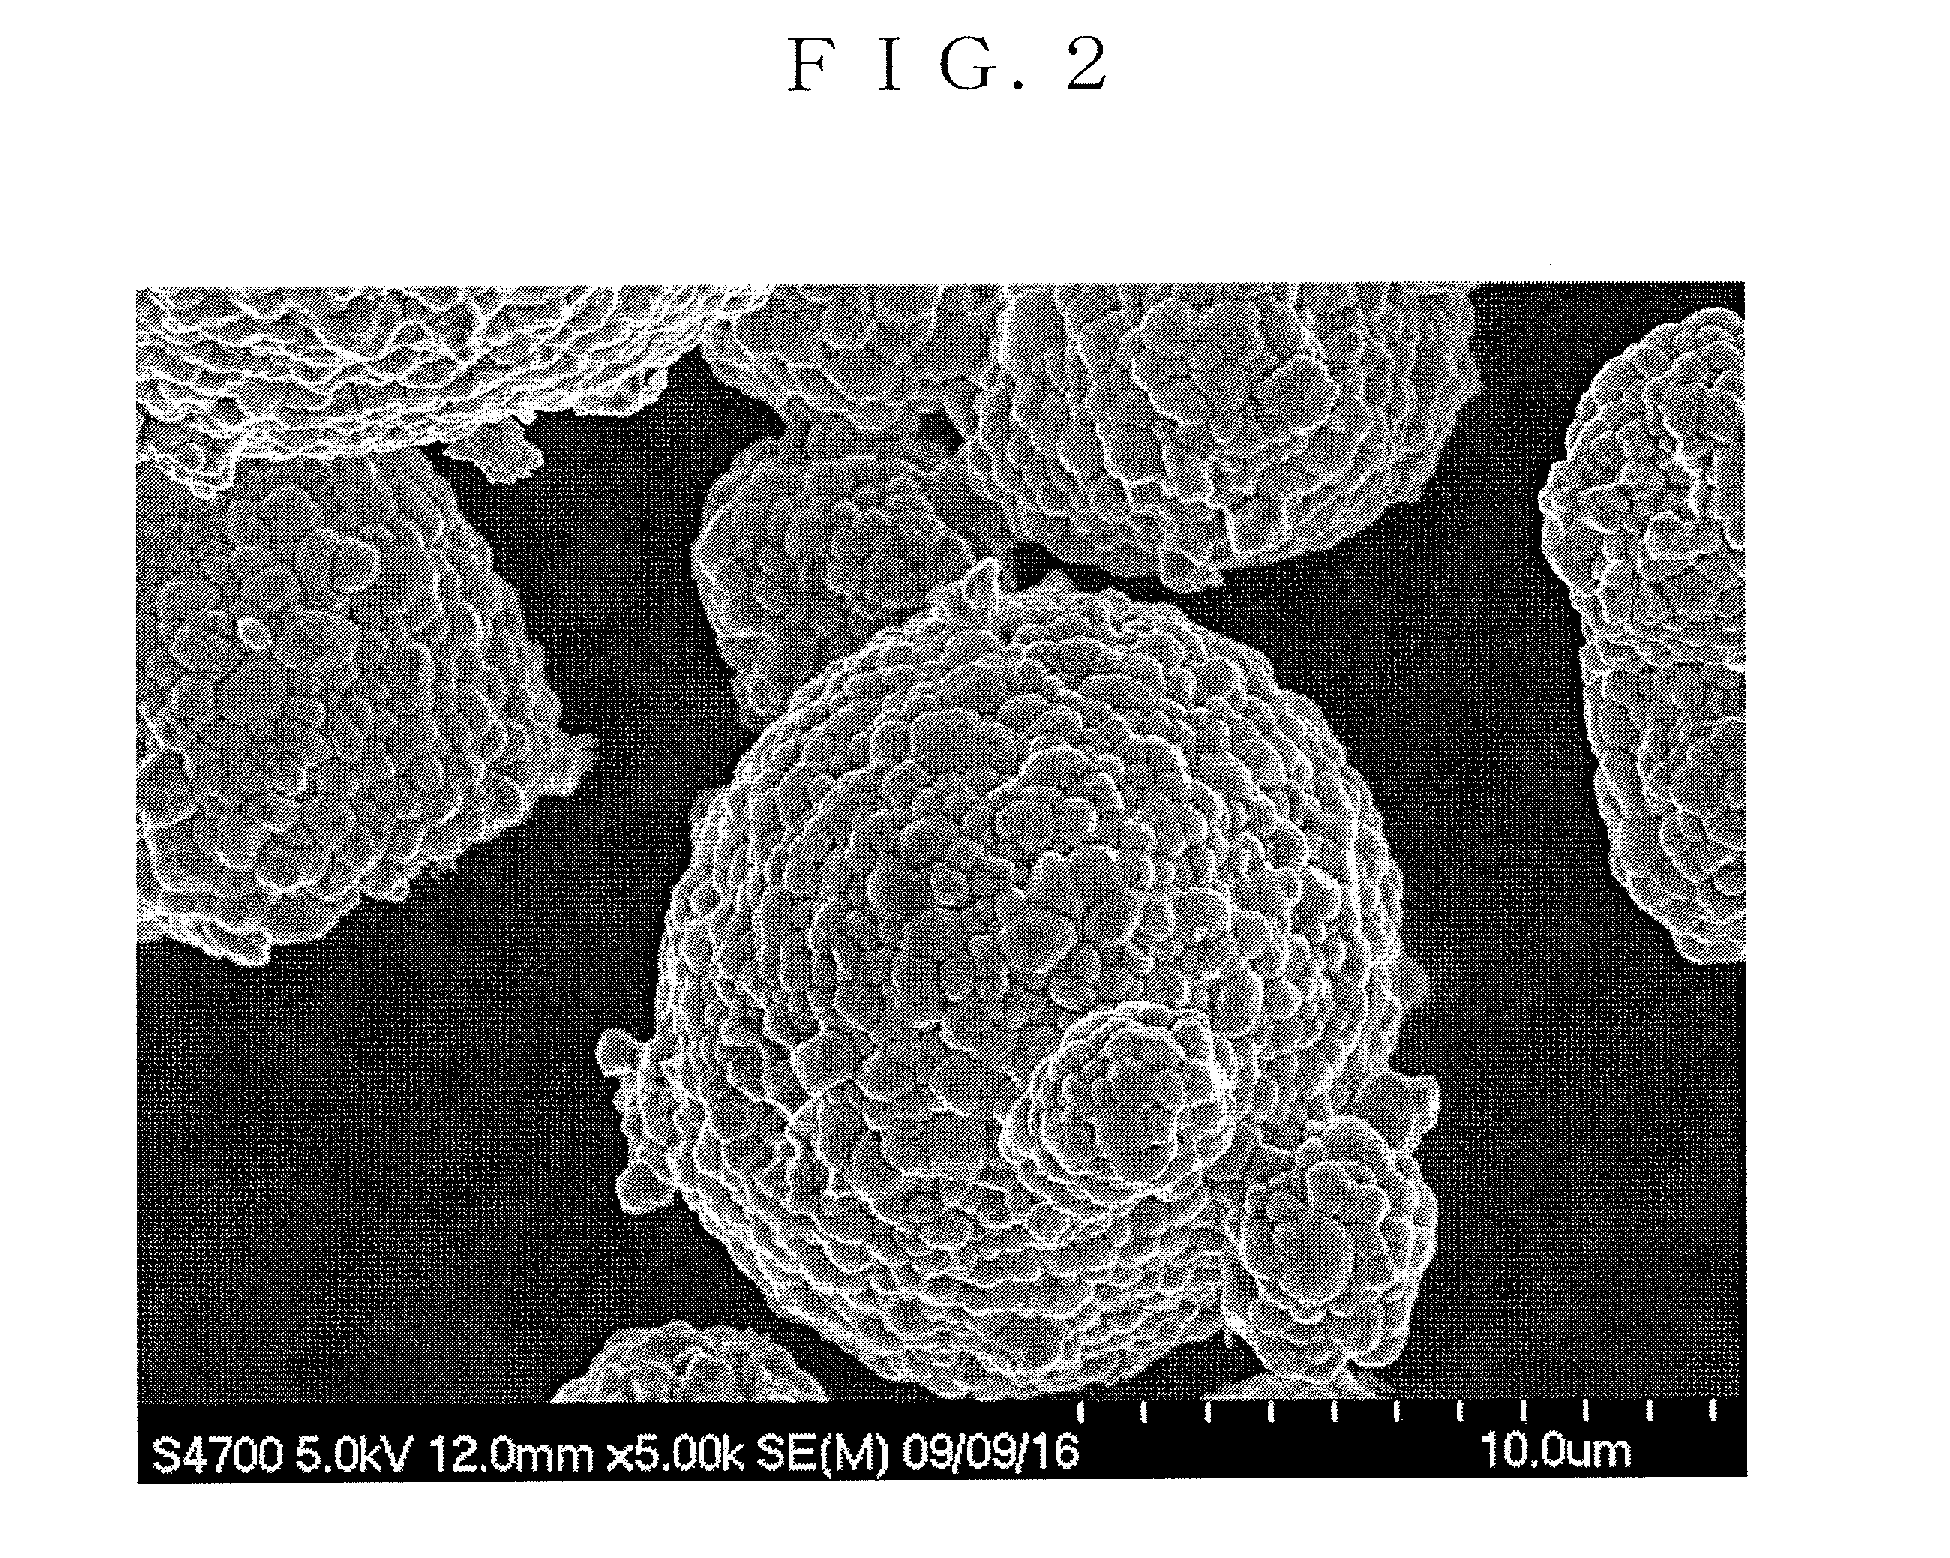 Positive-electrode active material for nonaqueous electrolyte secondary battery and method for producing the same, and nonaqueous electrolyte secondary battery